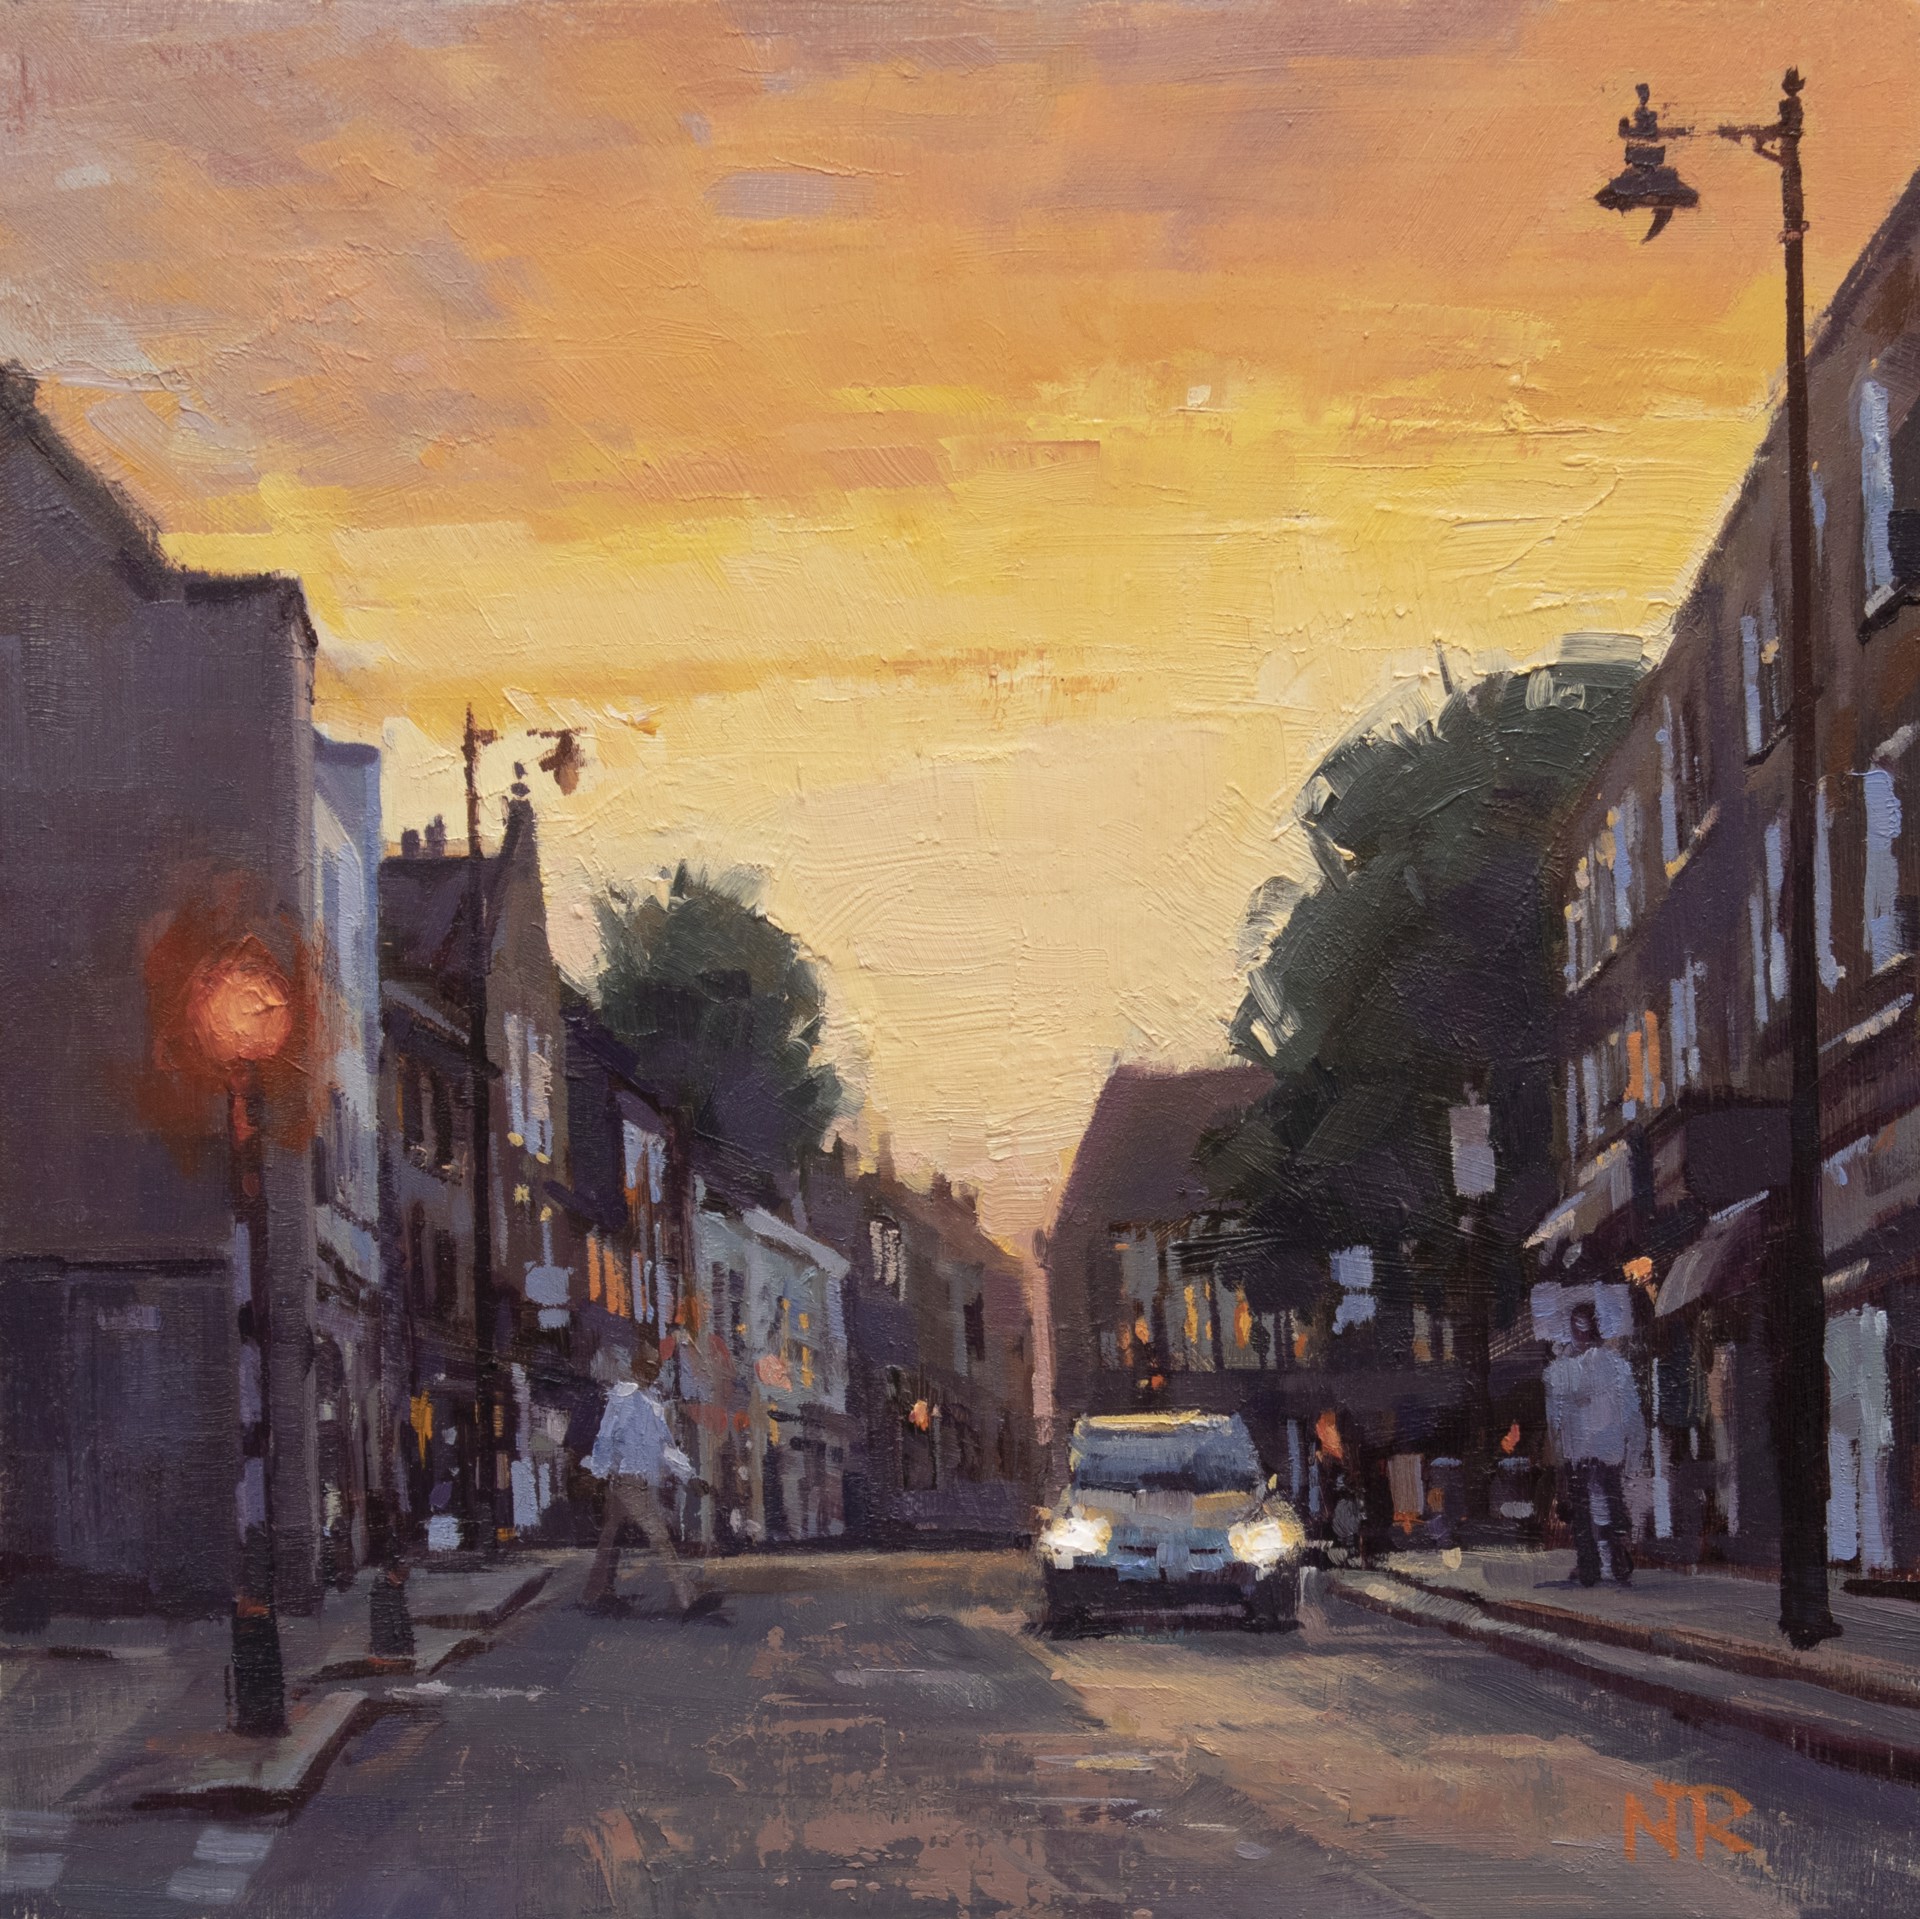 Sunset in London by Nate Ross